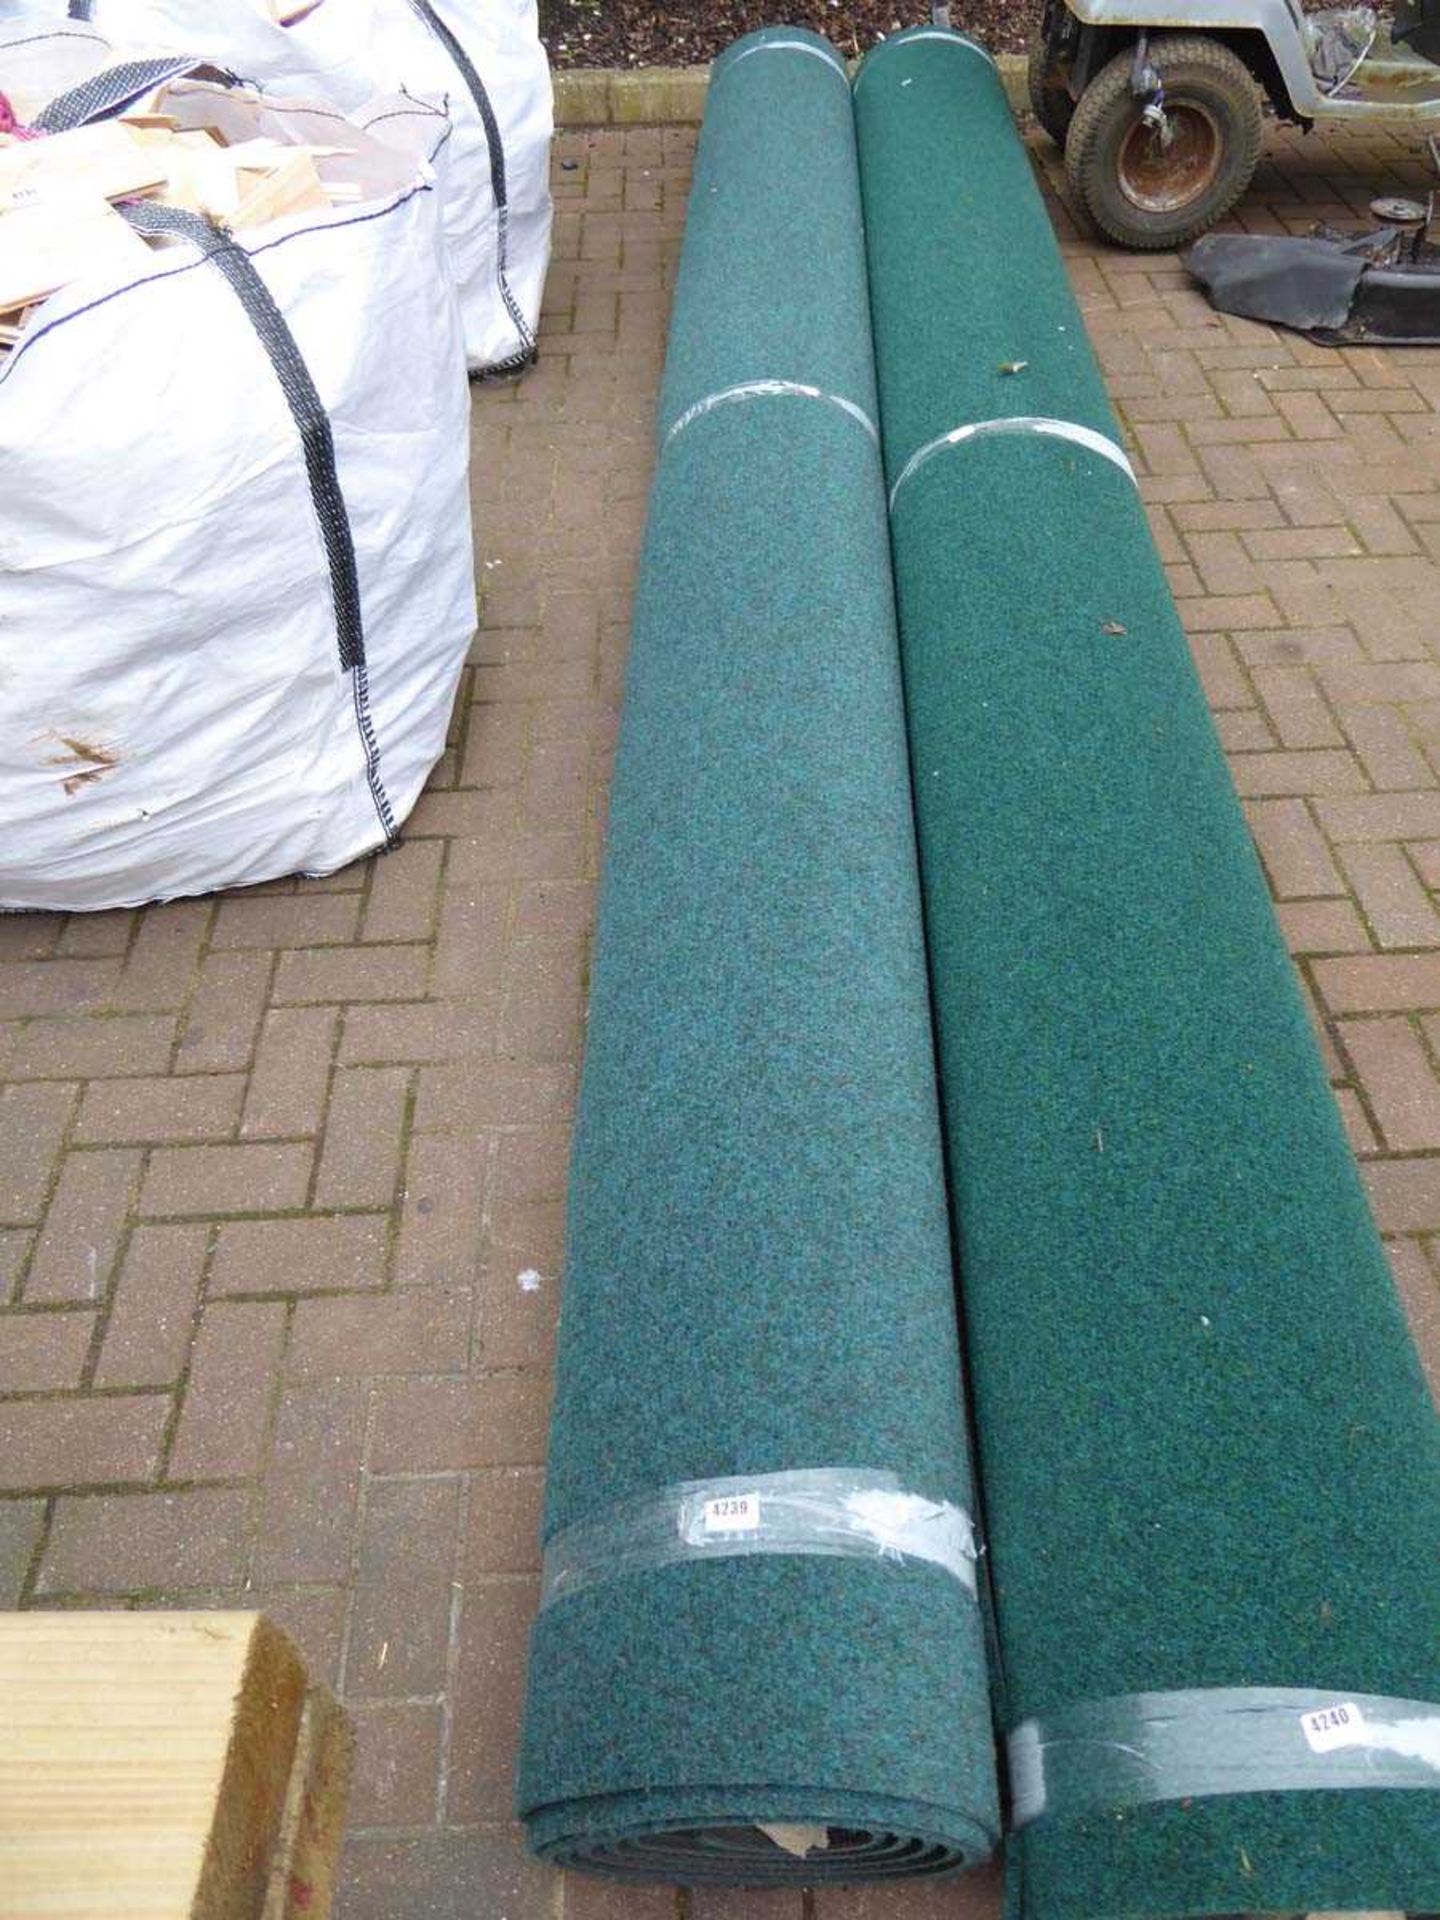 Roll of green commercial style carpet